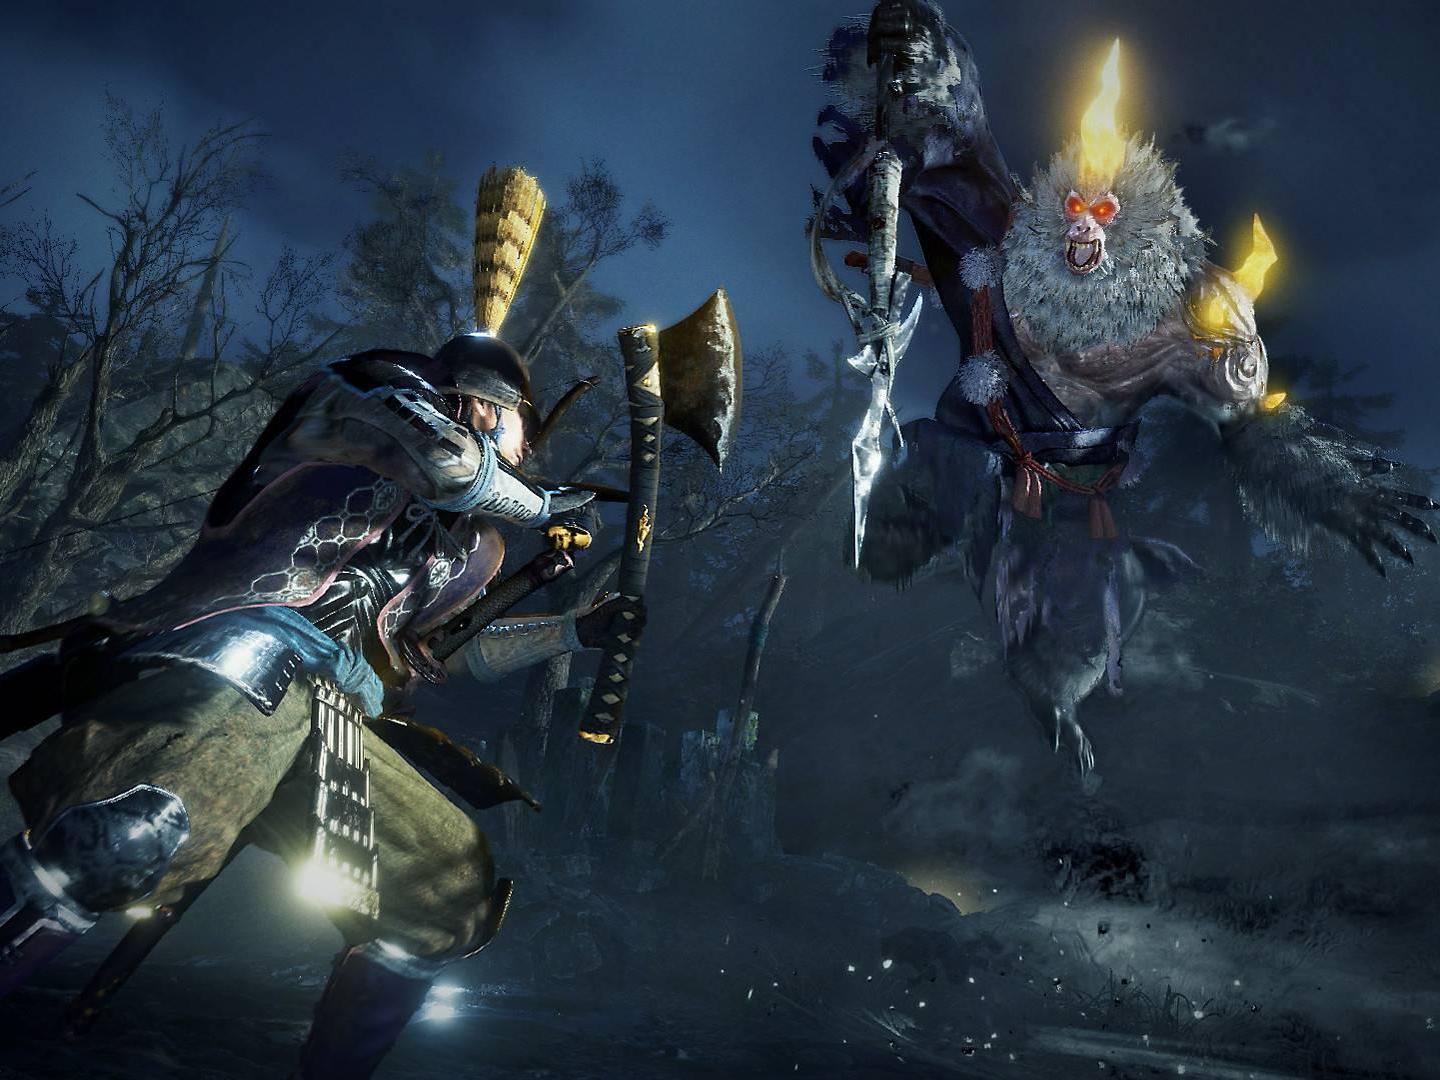 Nioh 2 colours its historical Japanese setting with dynamic action and great RPG elements